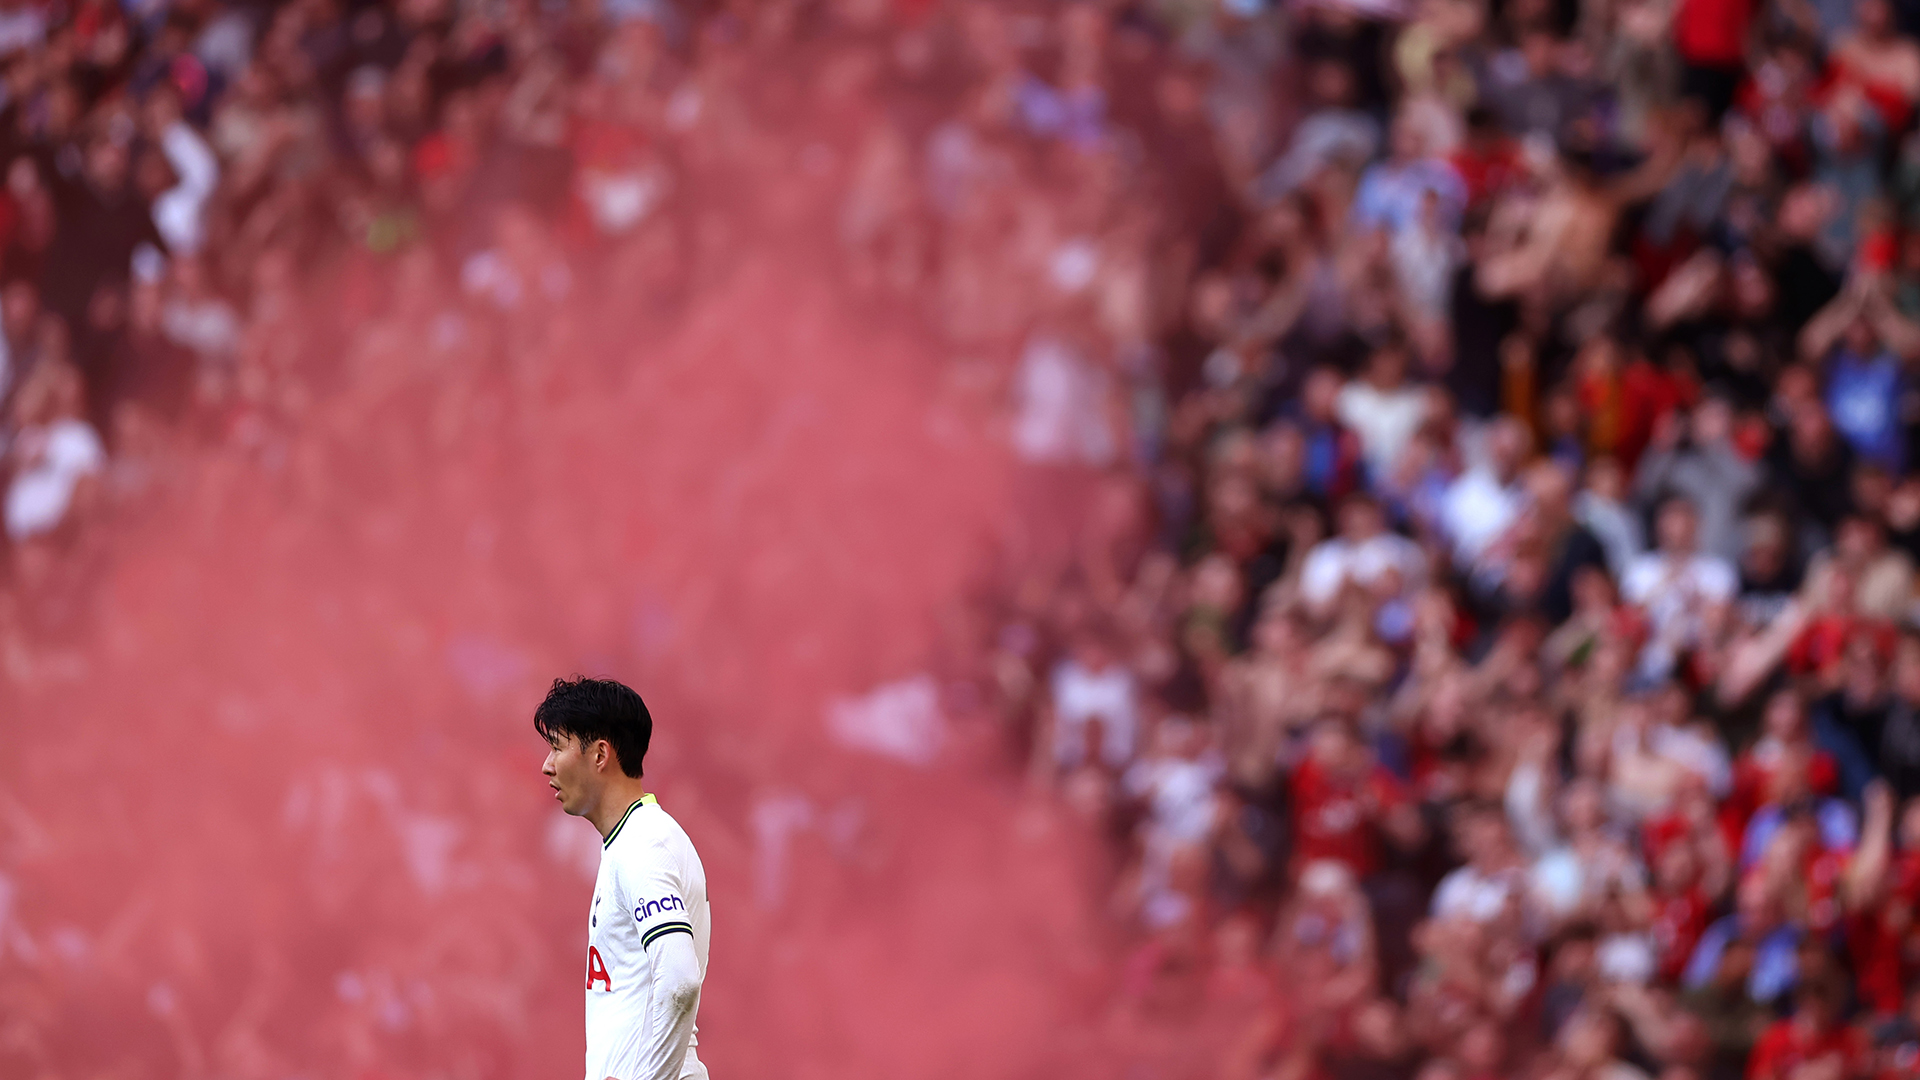 Son Heung-Min of Tottenham Hotspur looks on in-front of a flare after Bournemouth score their third goal during the Premier League match between Tottenham Hotspur and AFC Bournemouth at Tottenham Hotspur Stadium on April 15, 2023 in London, England.